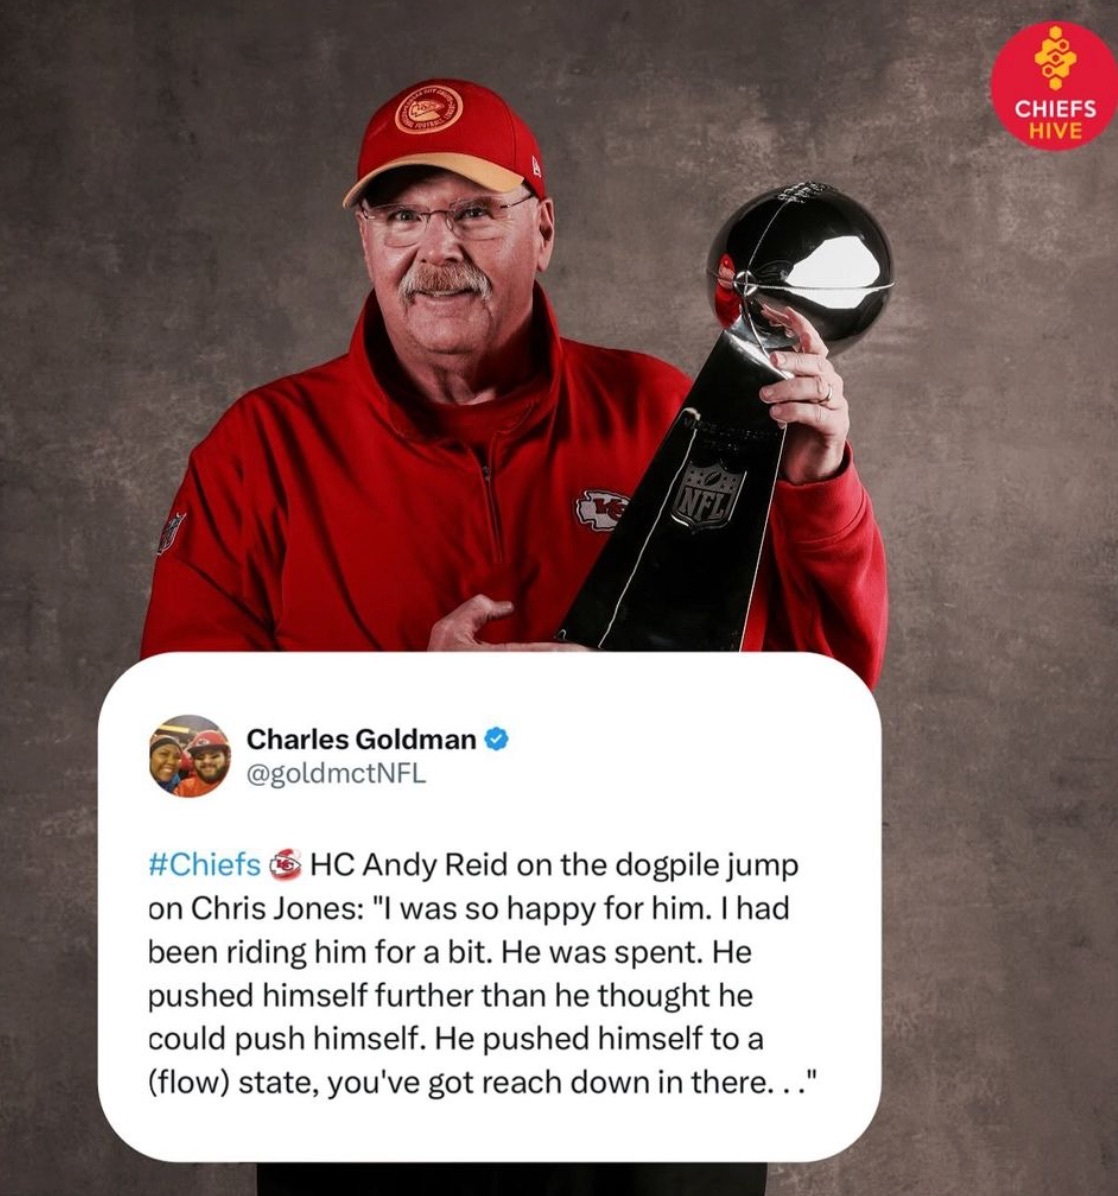 A photo of Kansas City Chief's head coach Andy Reid holding a trophy, with a Tweet overlaid that reads, "HC Andy Reid on the dogpile jump on Chris Jones: "I was so happy for him. I had been riding him for a bit. He was spent. He pushed himself further than he thought he could push himself. He pushed himself to a Flow State, you've gotta reach down in there..."